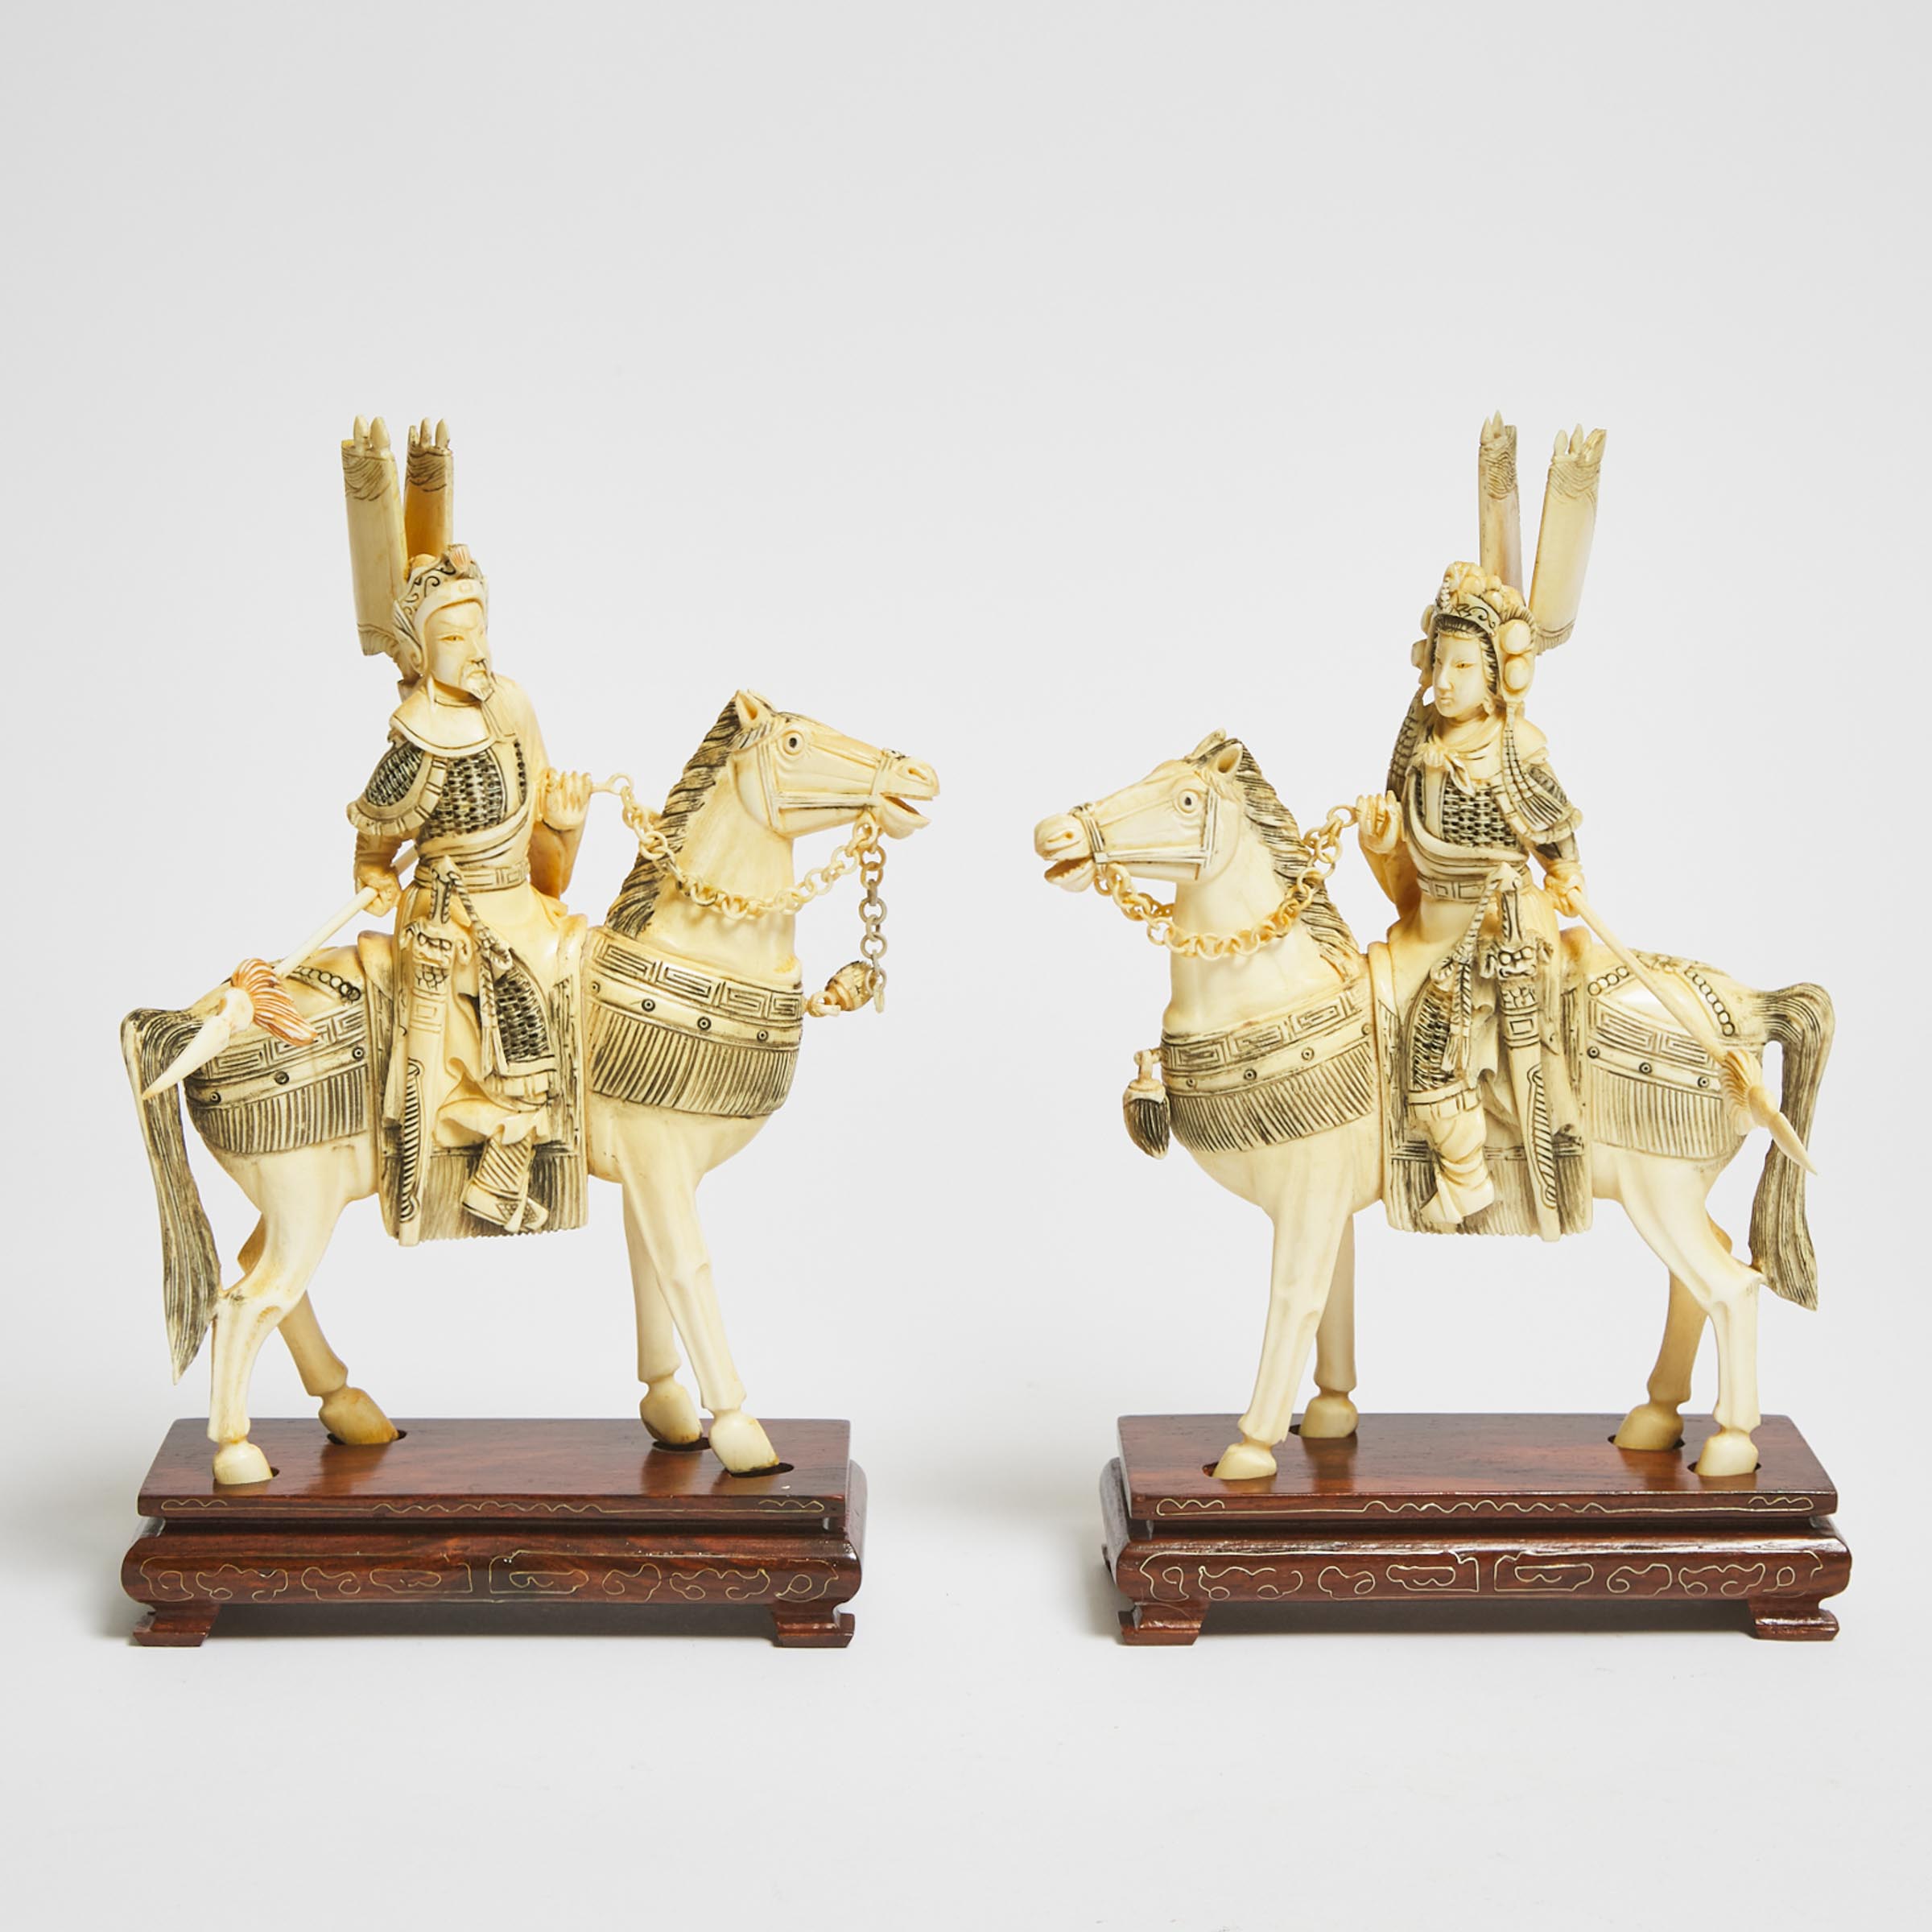 A Pair of Ivory Figures of King and